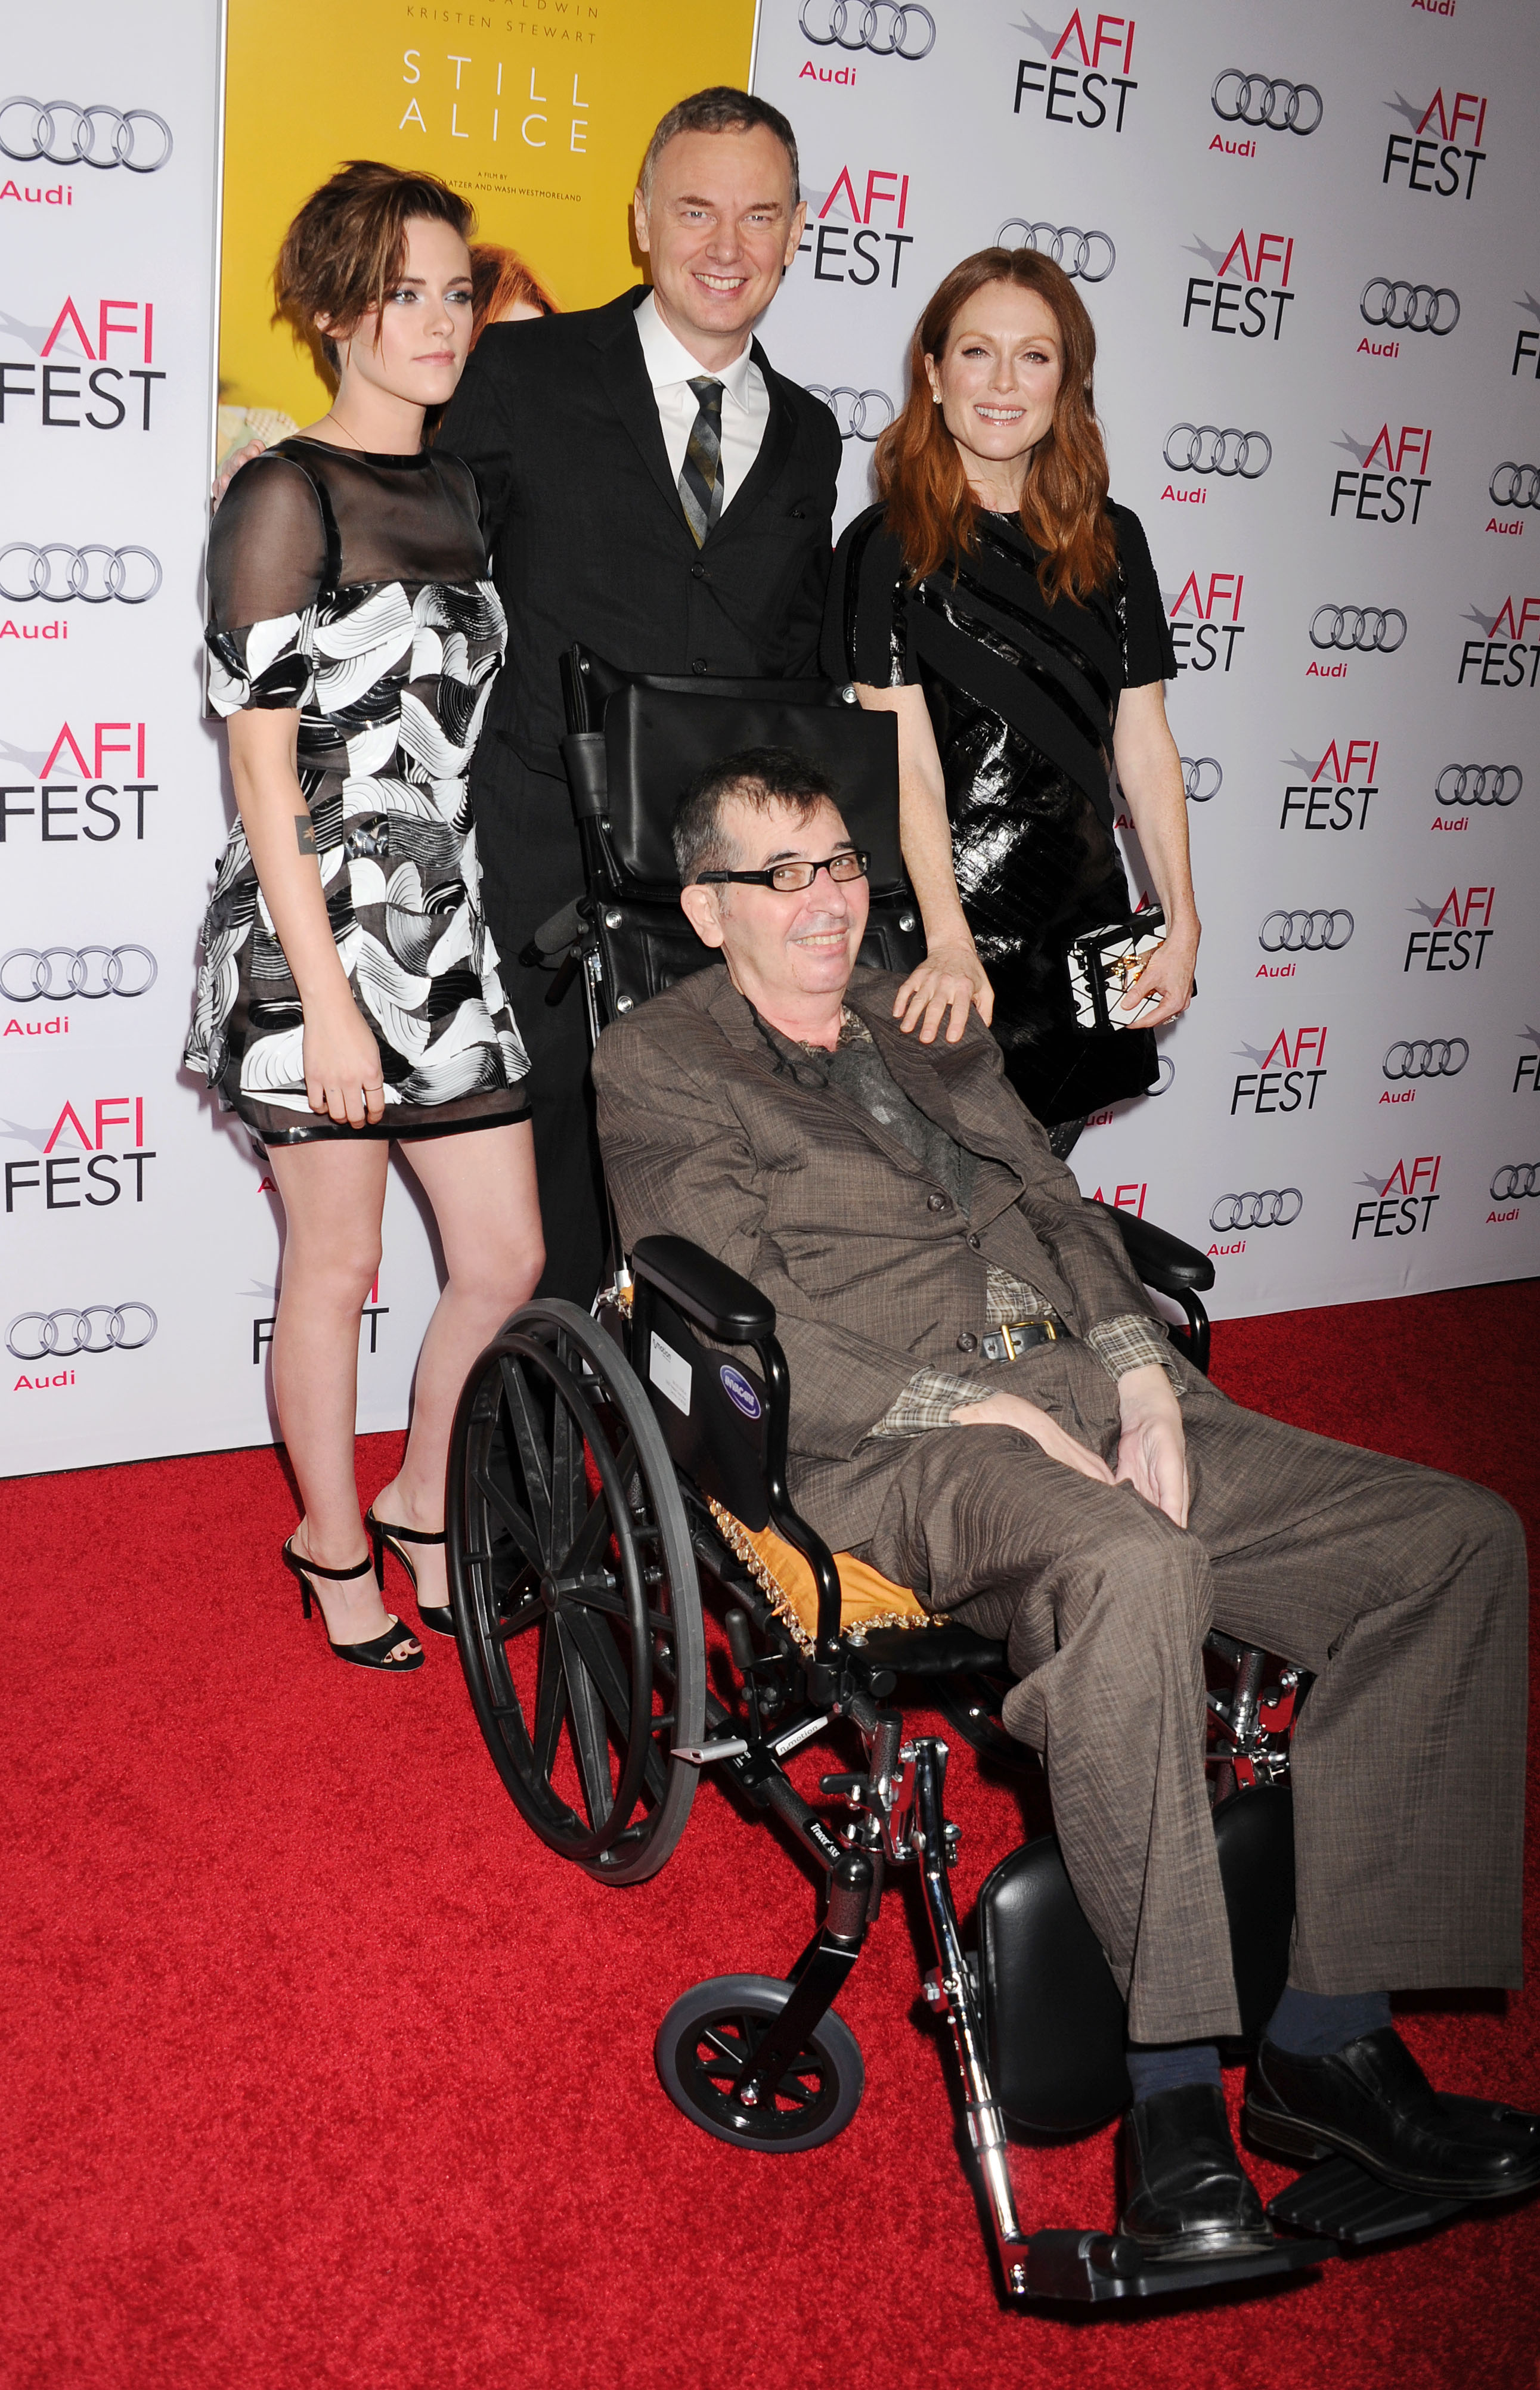 From left clockwise, actress Kristen Stewart, director Wash Westmoreland, actress Julianne Moore and director Richard Glatzer arrive at a premier of <i>Still Alice</i> at Dolby Theatre in Hollywood on Nov. 12, 2014 (Jeffrey Mayer—WireImage/Getty Images)